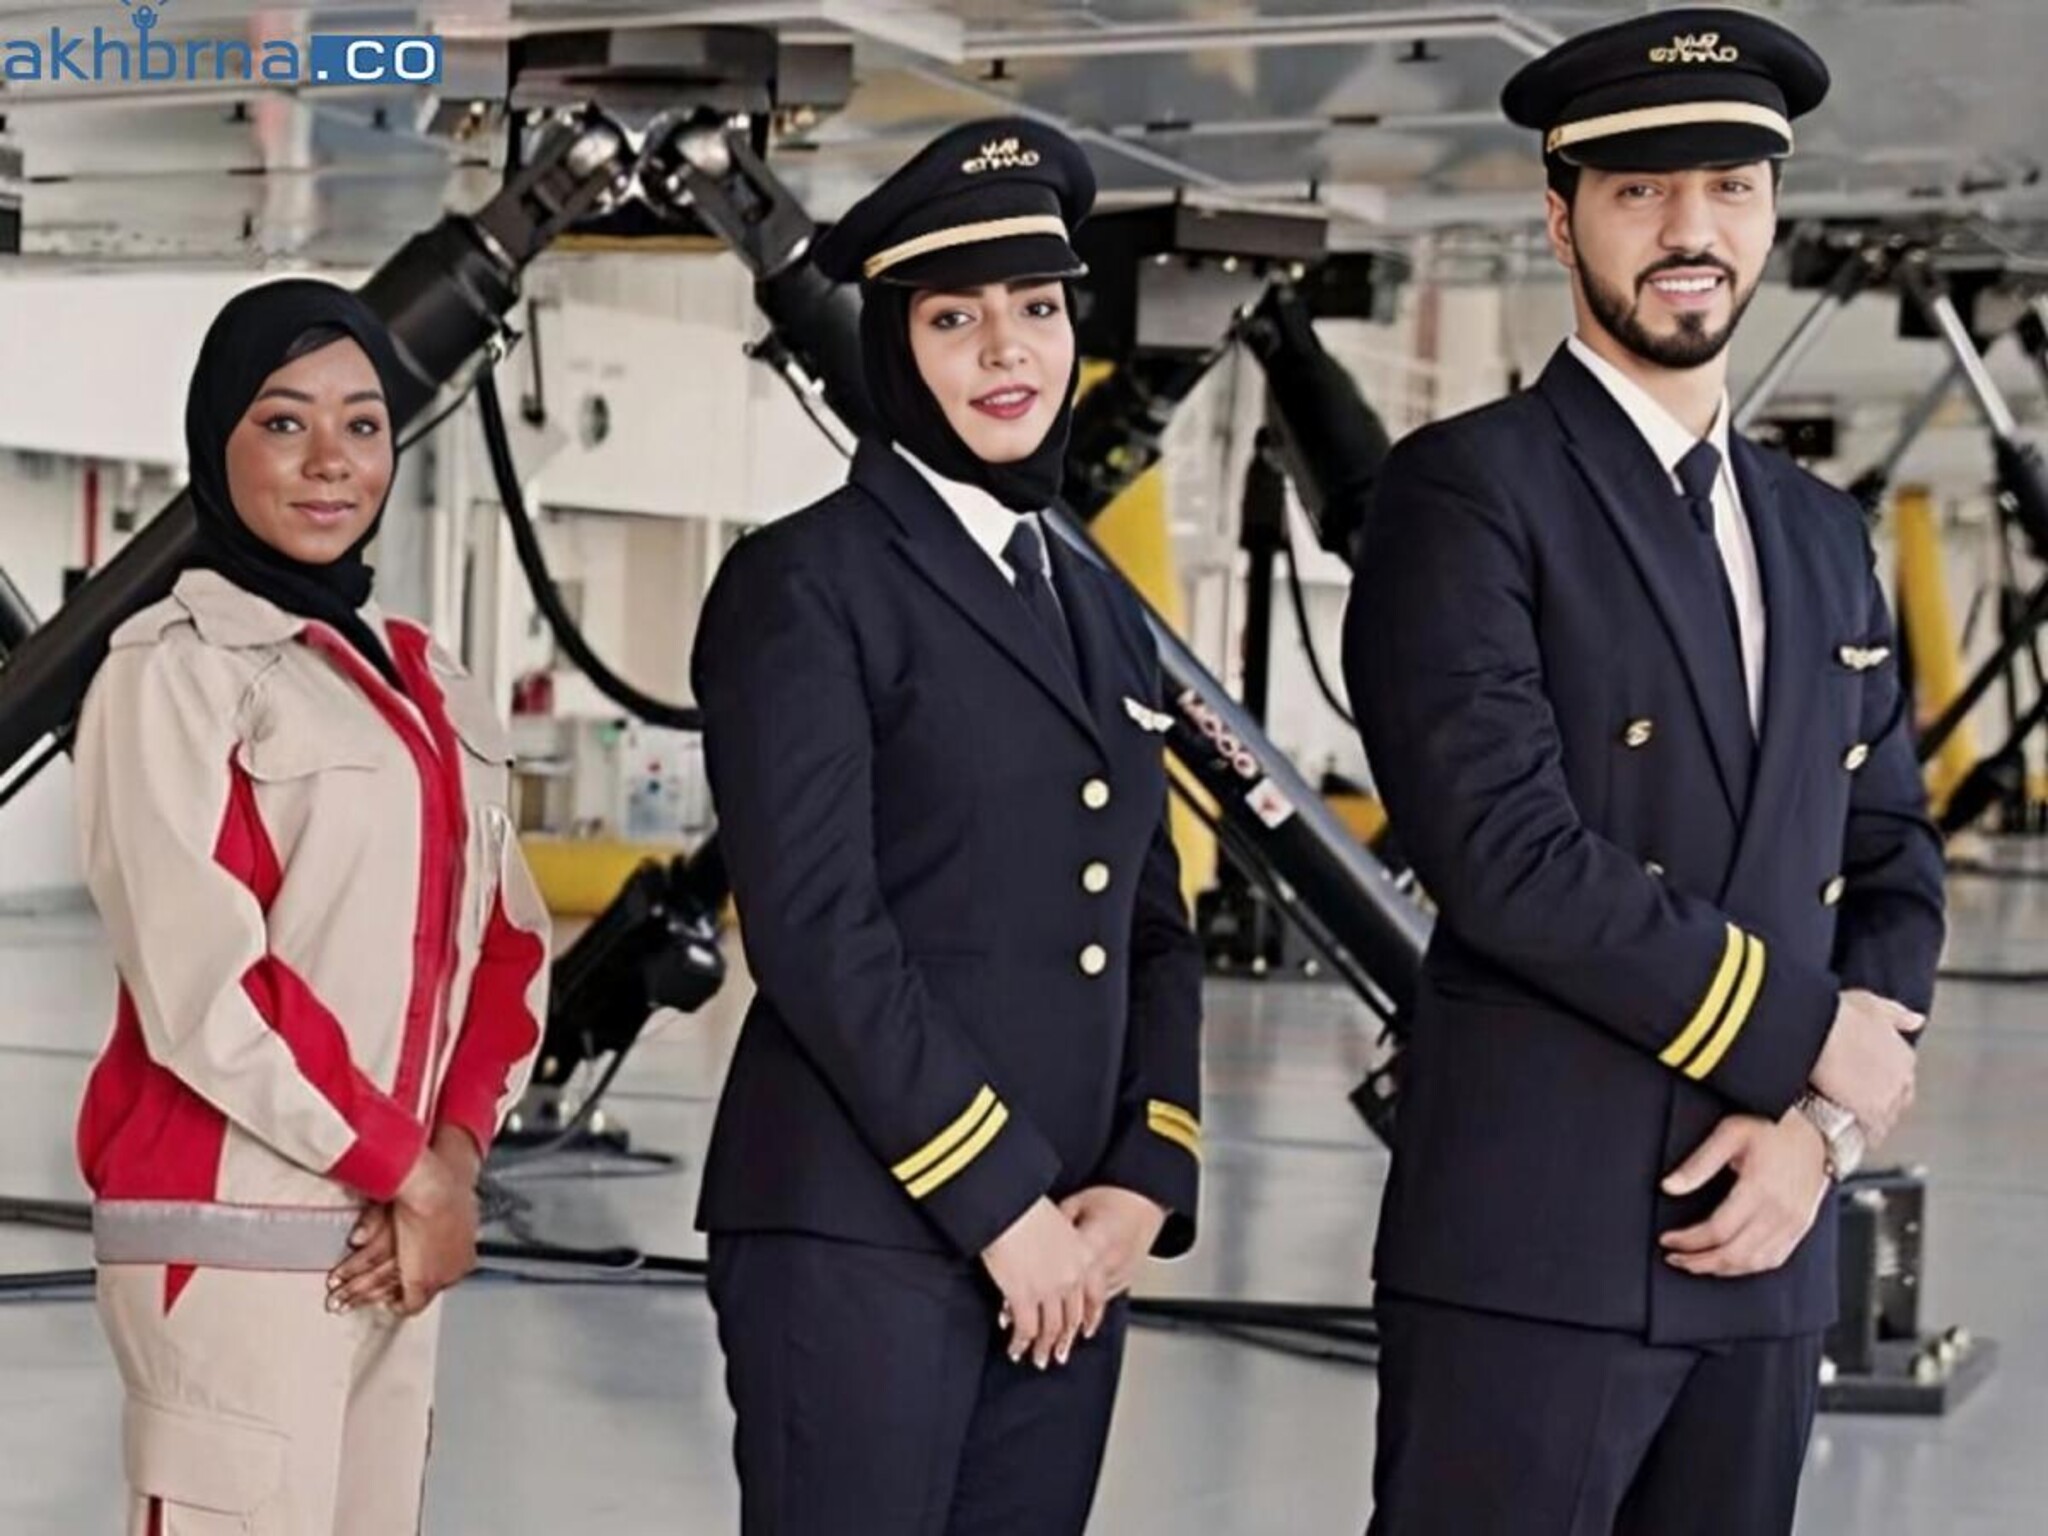 Etihad Airways plans to hire more than 2,000 cabin crew members this year